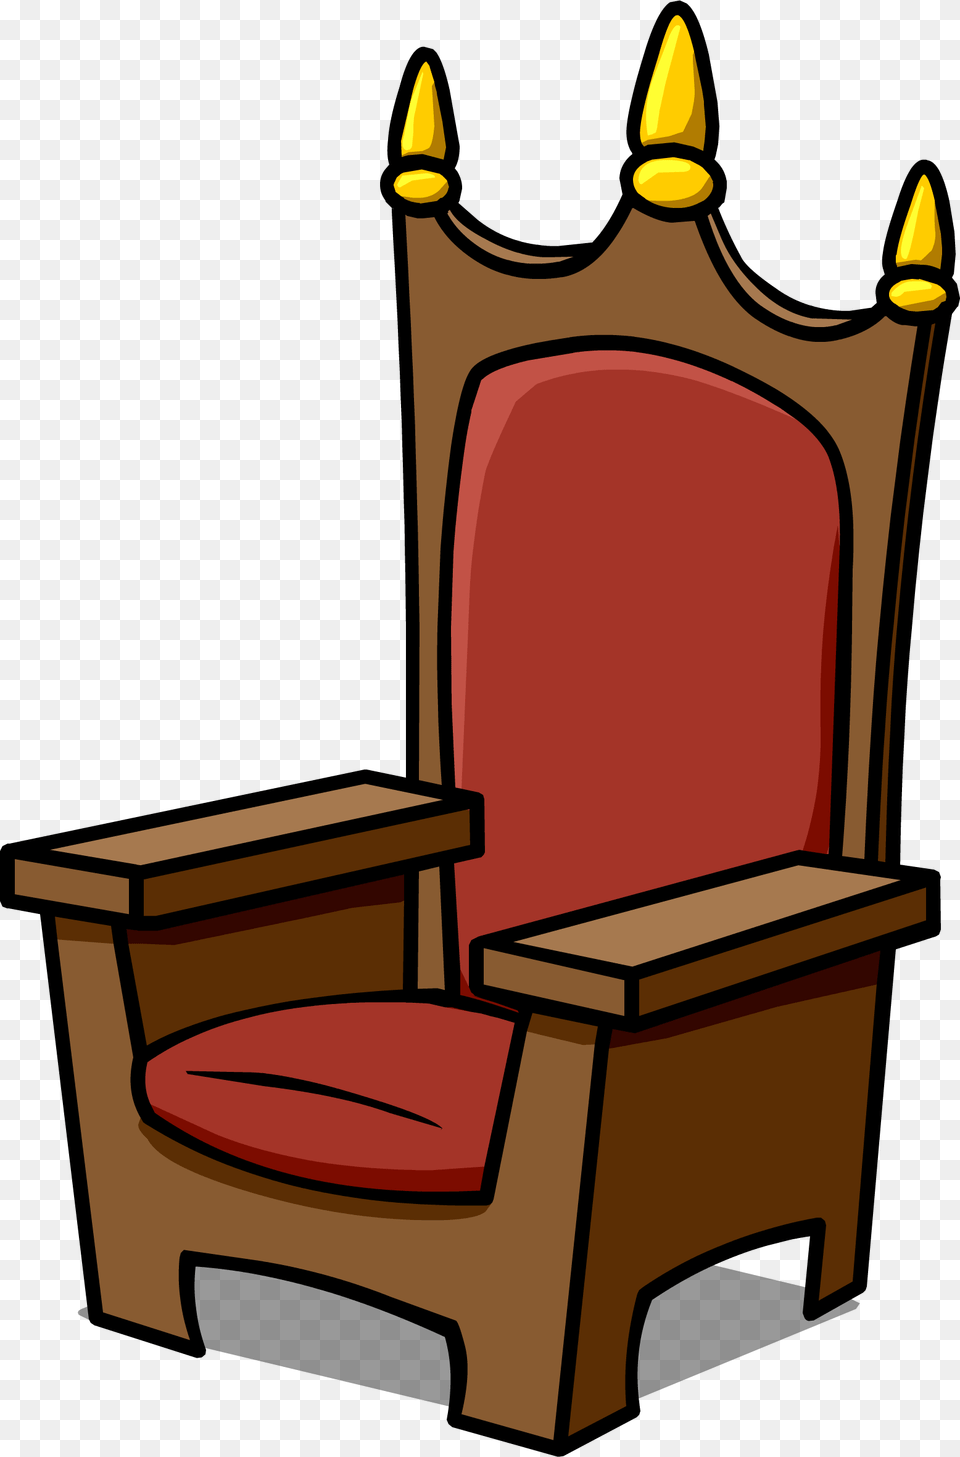 Royal Throne Id 343 Sprite Royal Throne, Furniture, Chair Png Image